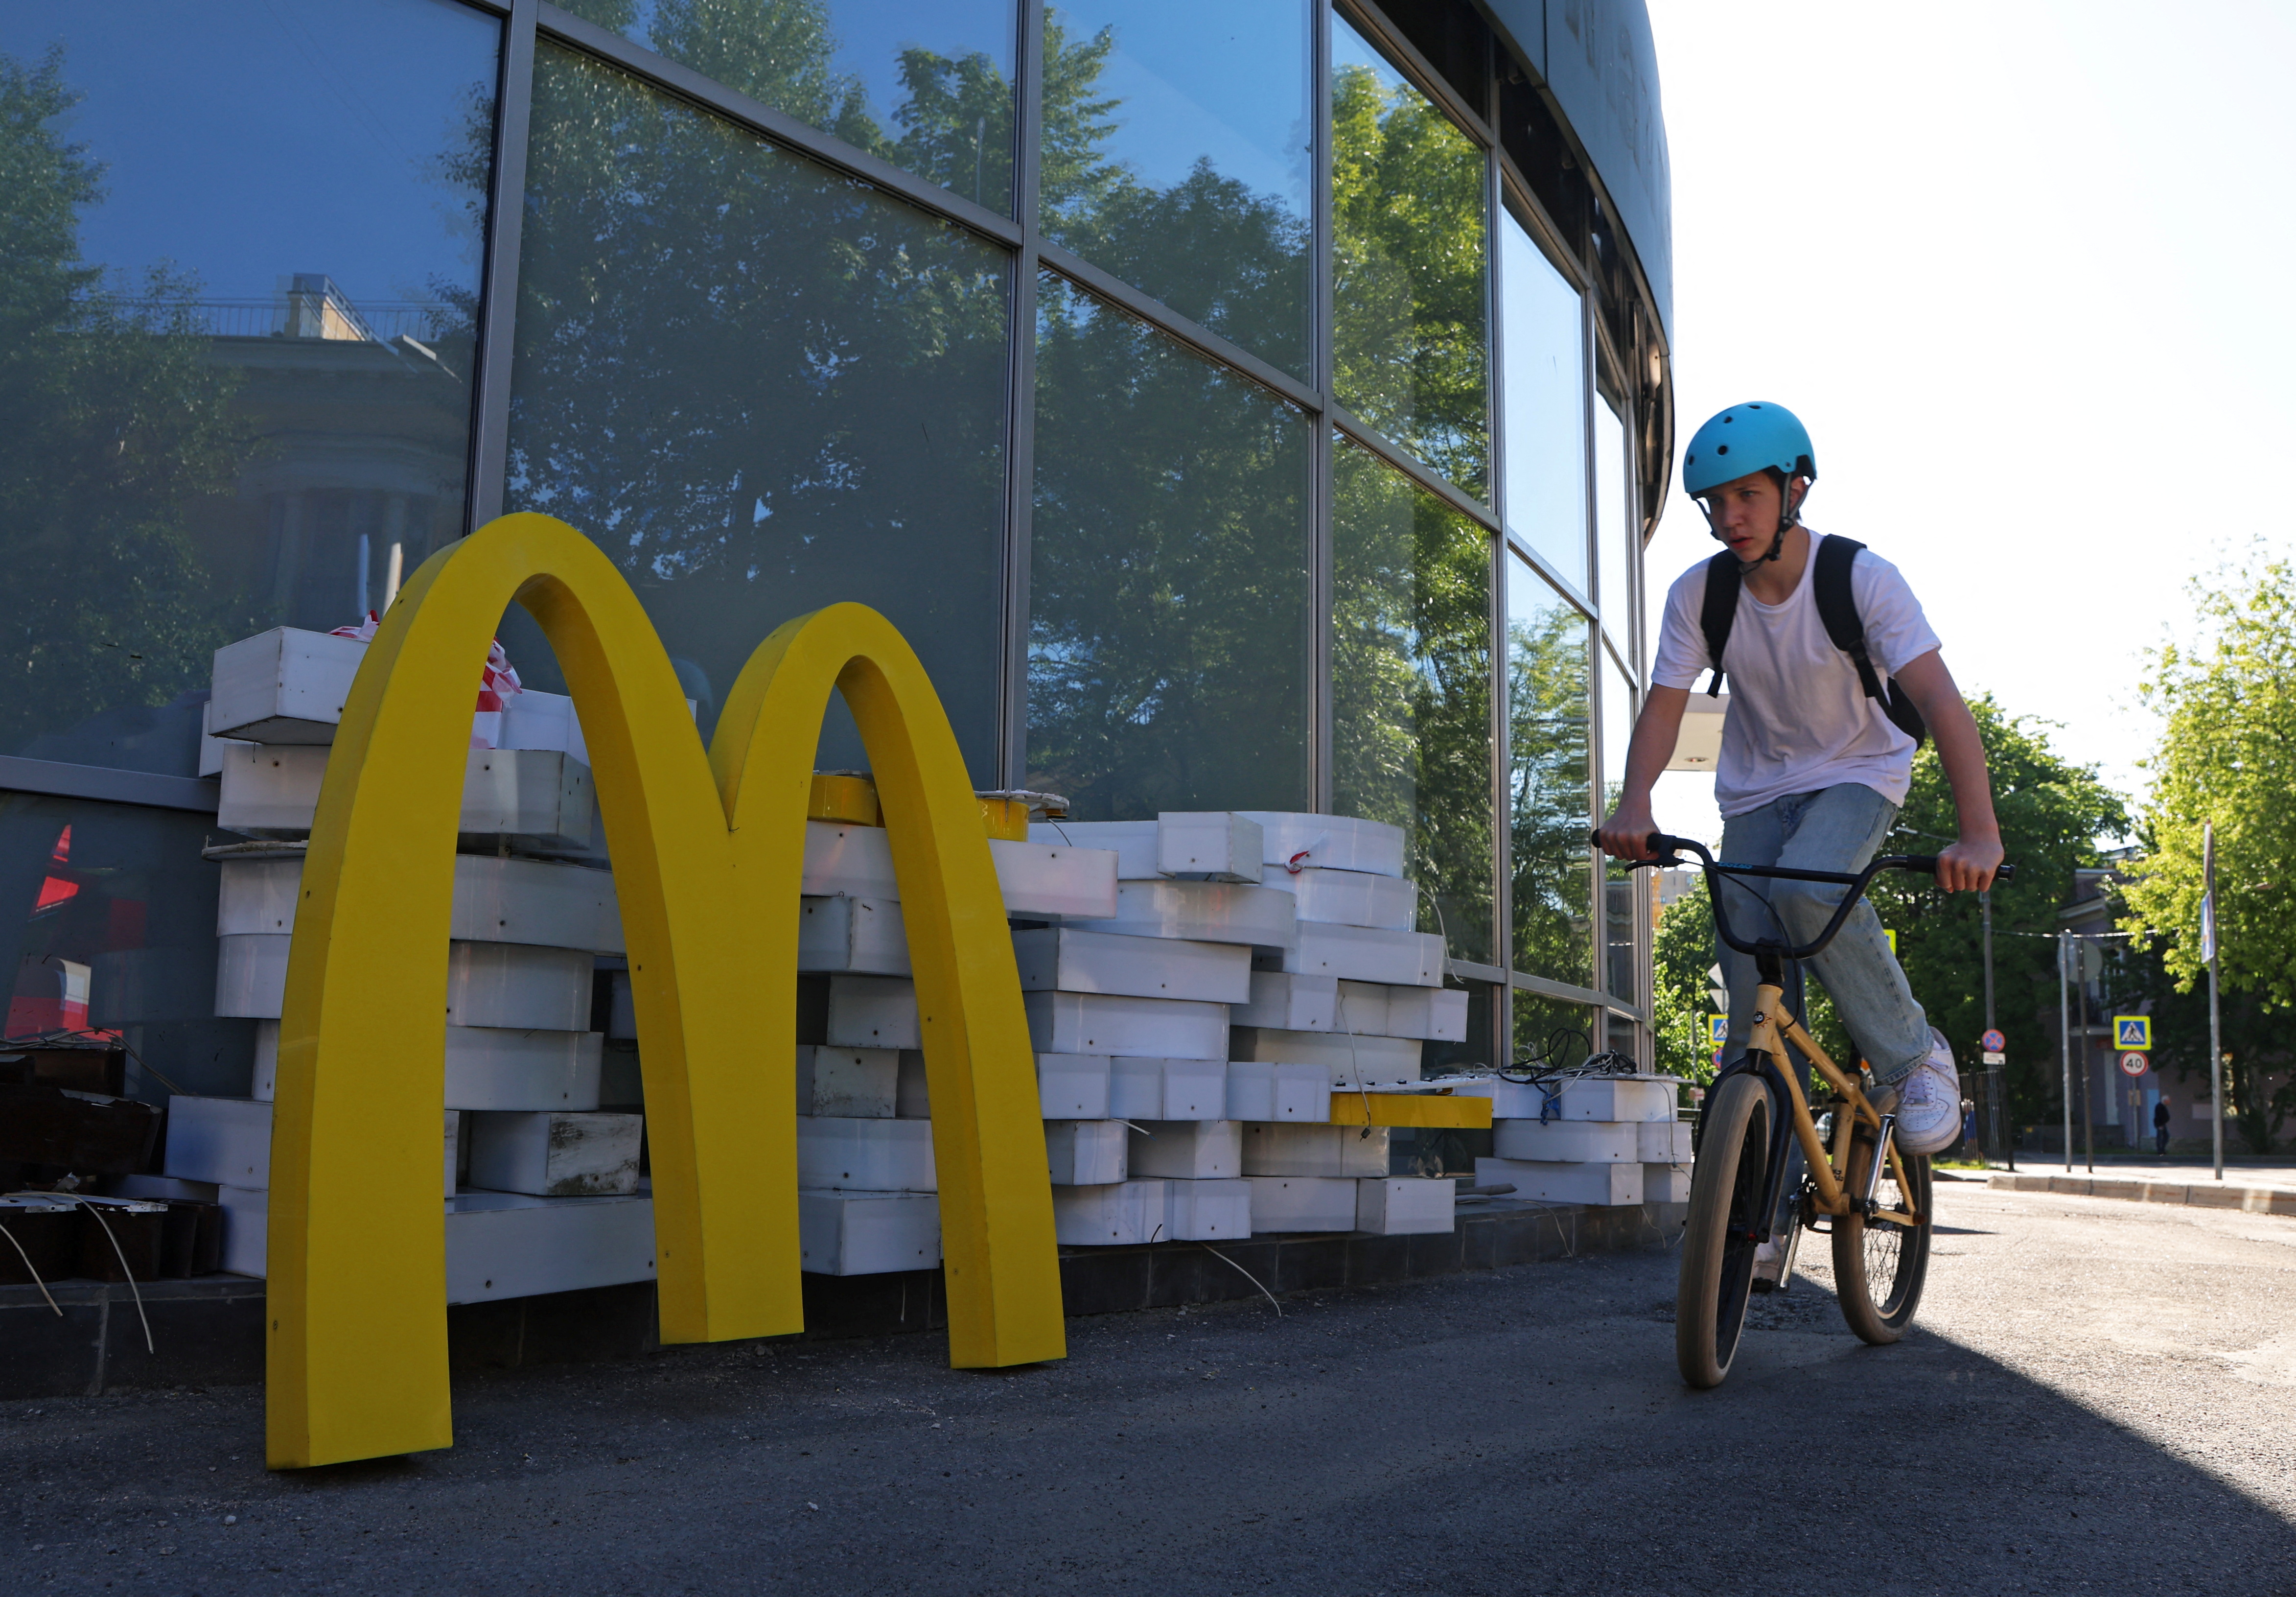 Workers dismantle a McDonald's sign from a restaurant in Saint Petersburg